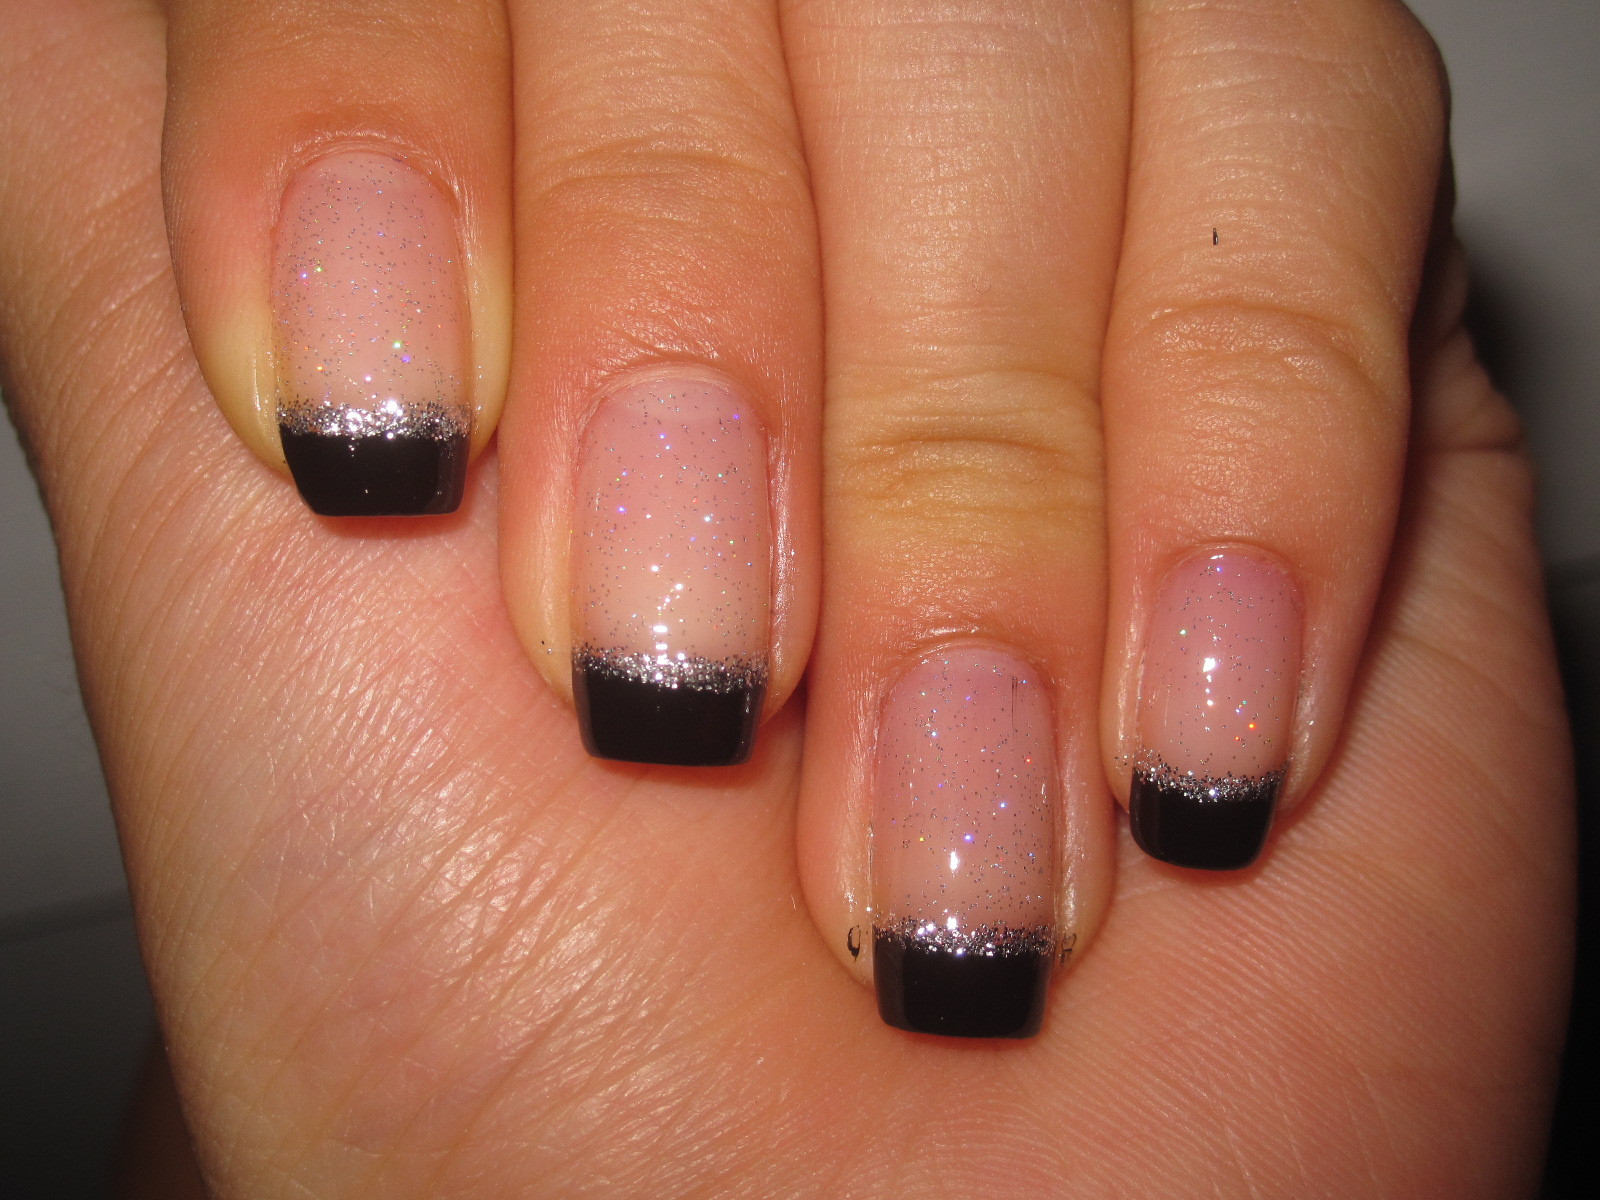 Black French Tip Nail Designs
 Jelly s Nails Black French Tips with Silver Lining